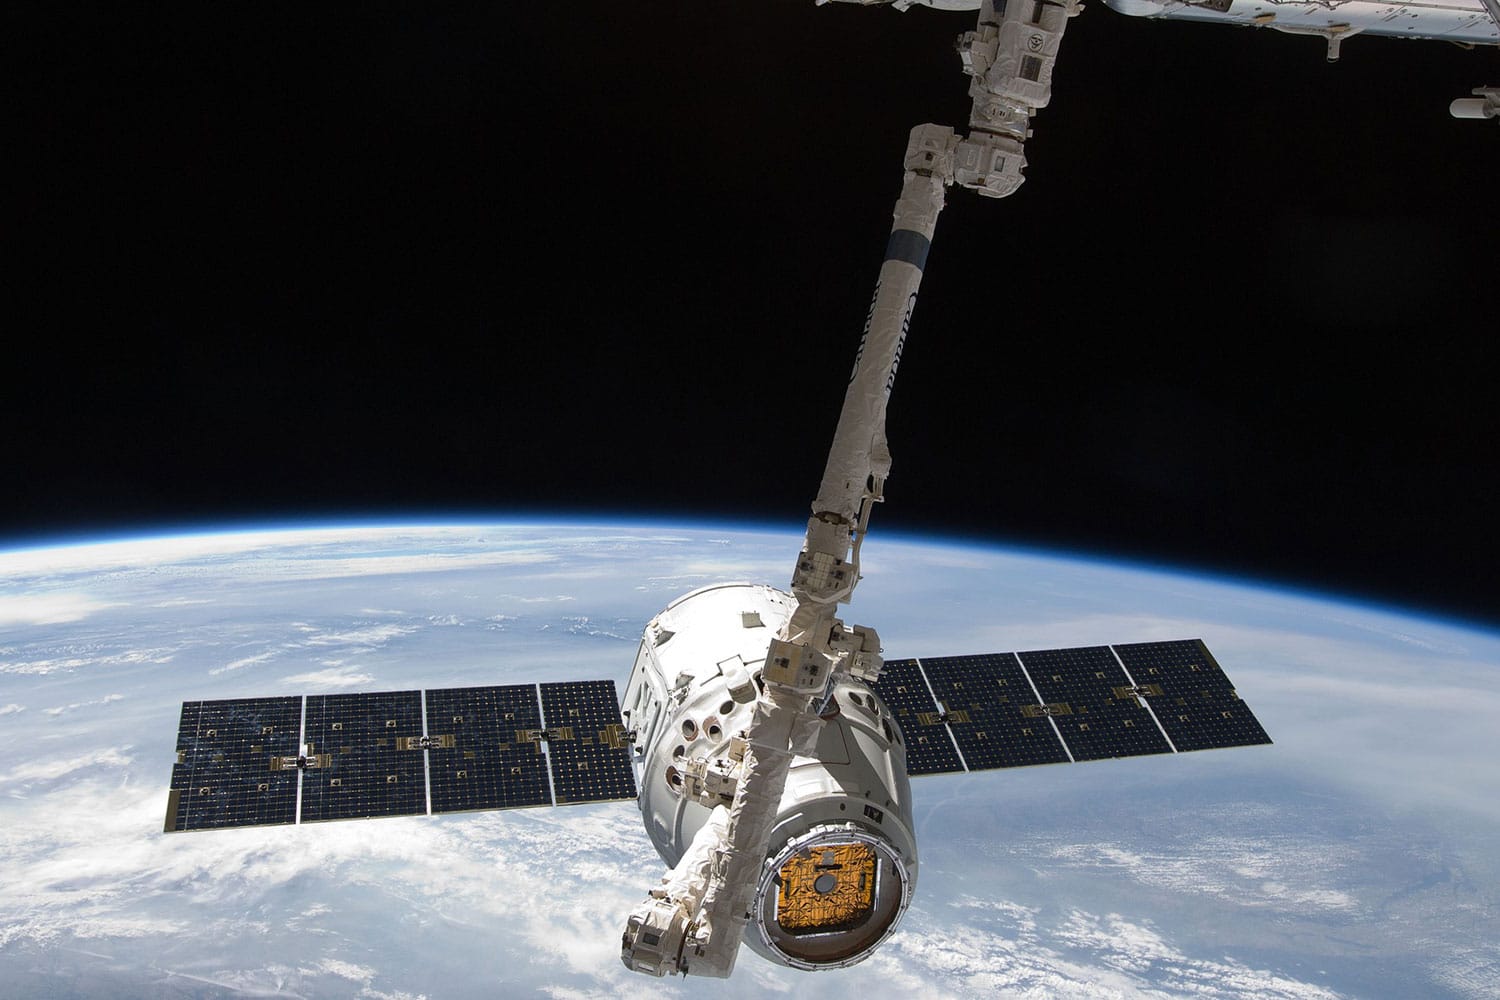 Nanowire solar cells are being tested in space.